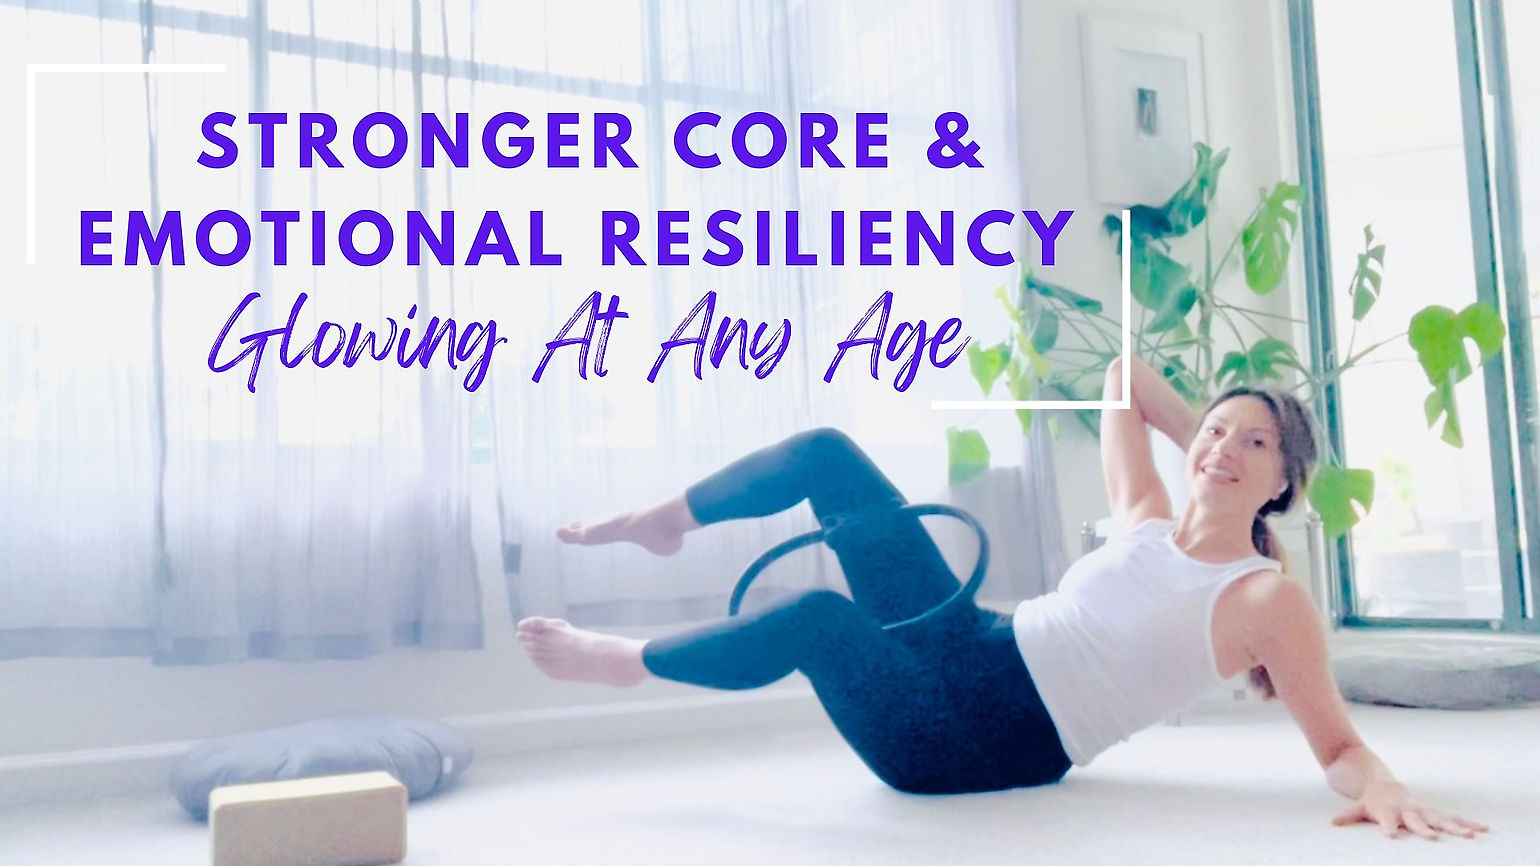 Stronger Core & Emotional Resiliency 20min